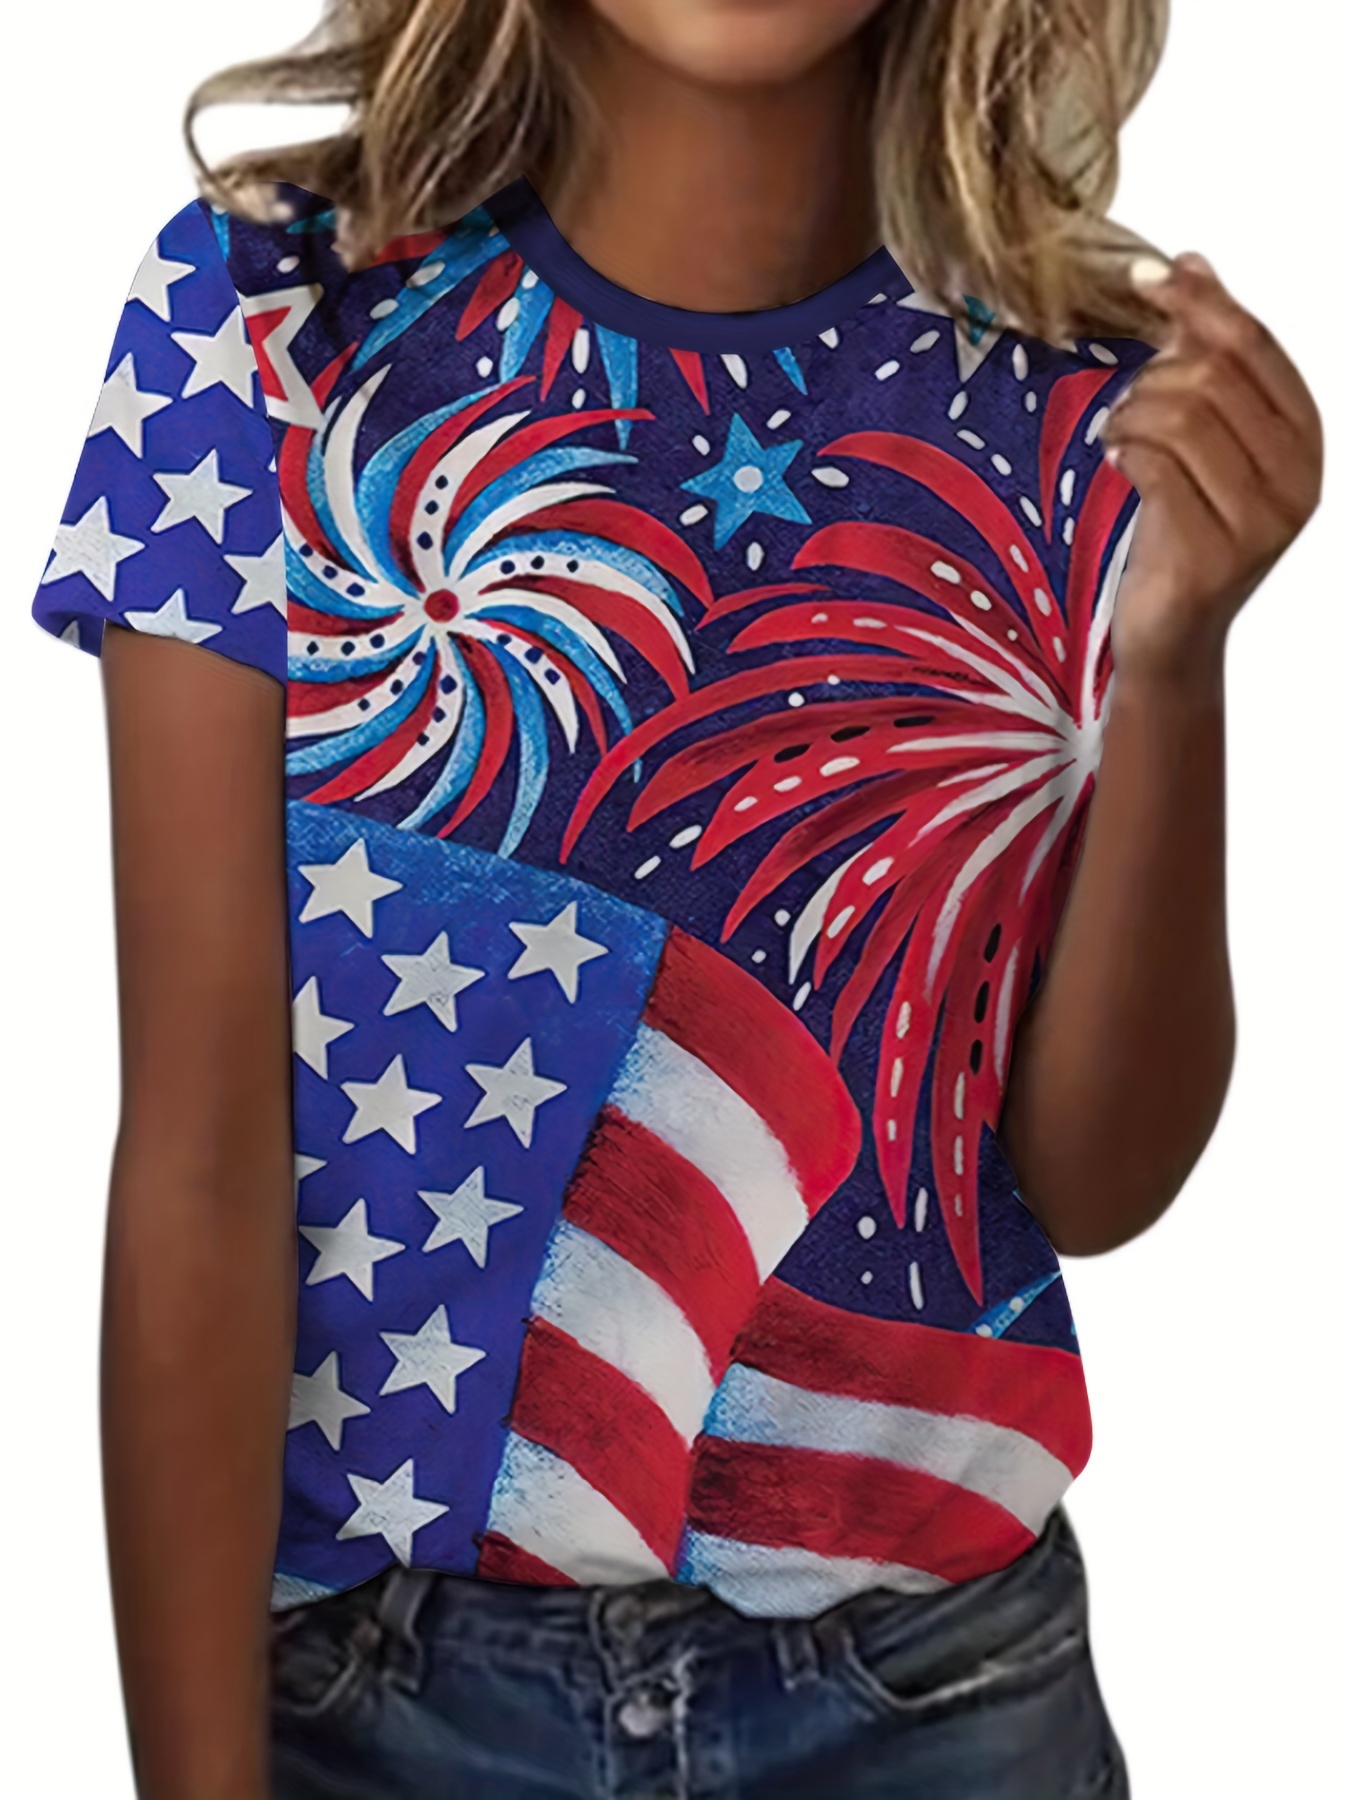 USA Flag Women's Bikini, Patriotic, USA, United States, American Flag,  Swimwear, 4th July, Independence Day, American, Accessories, Gifts. -   Canada